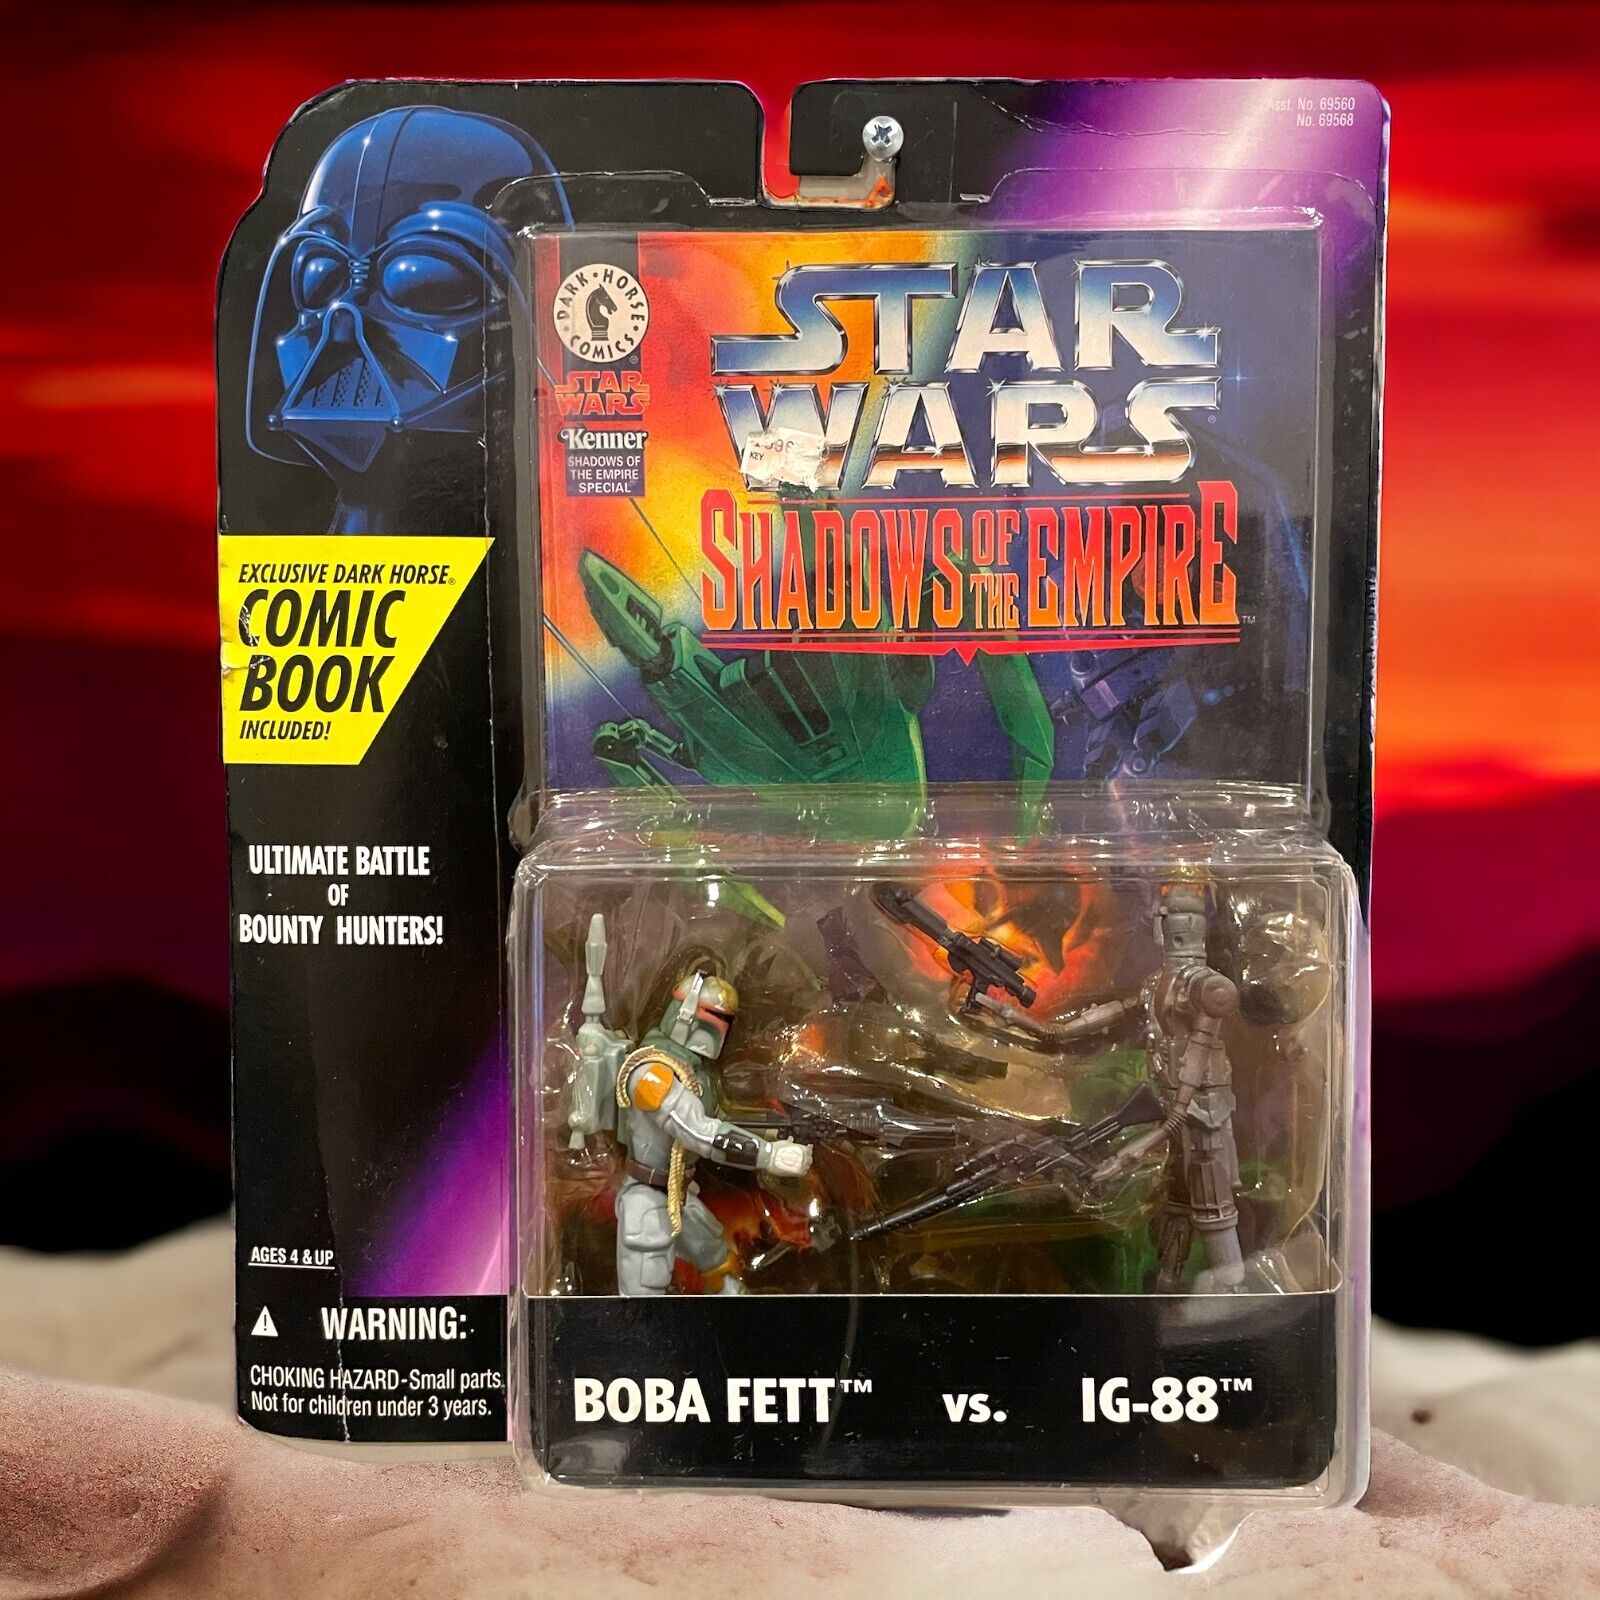 STAR WARS BOBA FETT VS. IG-88 ACTION FIGURES  SEALED SHADOWS OF THE EMPIRE COMIC